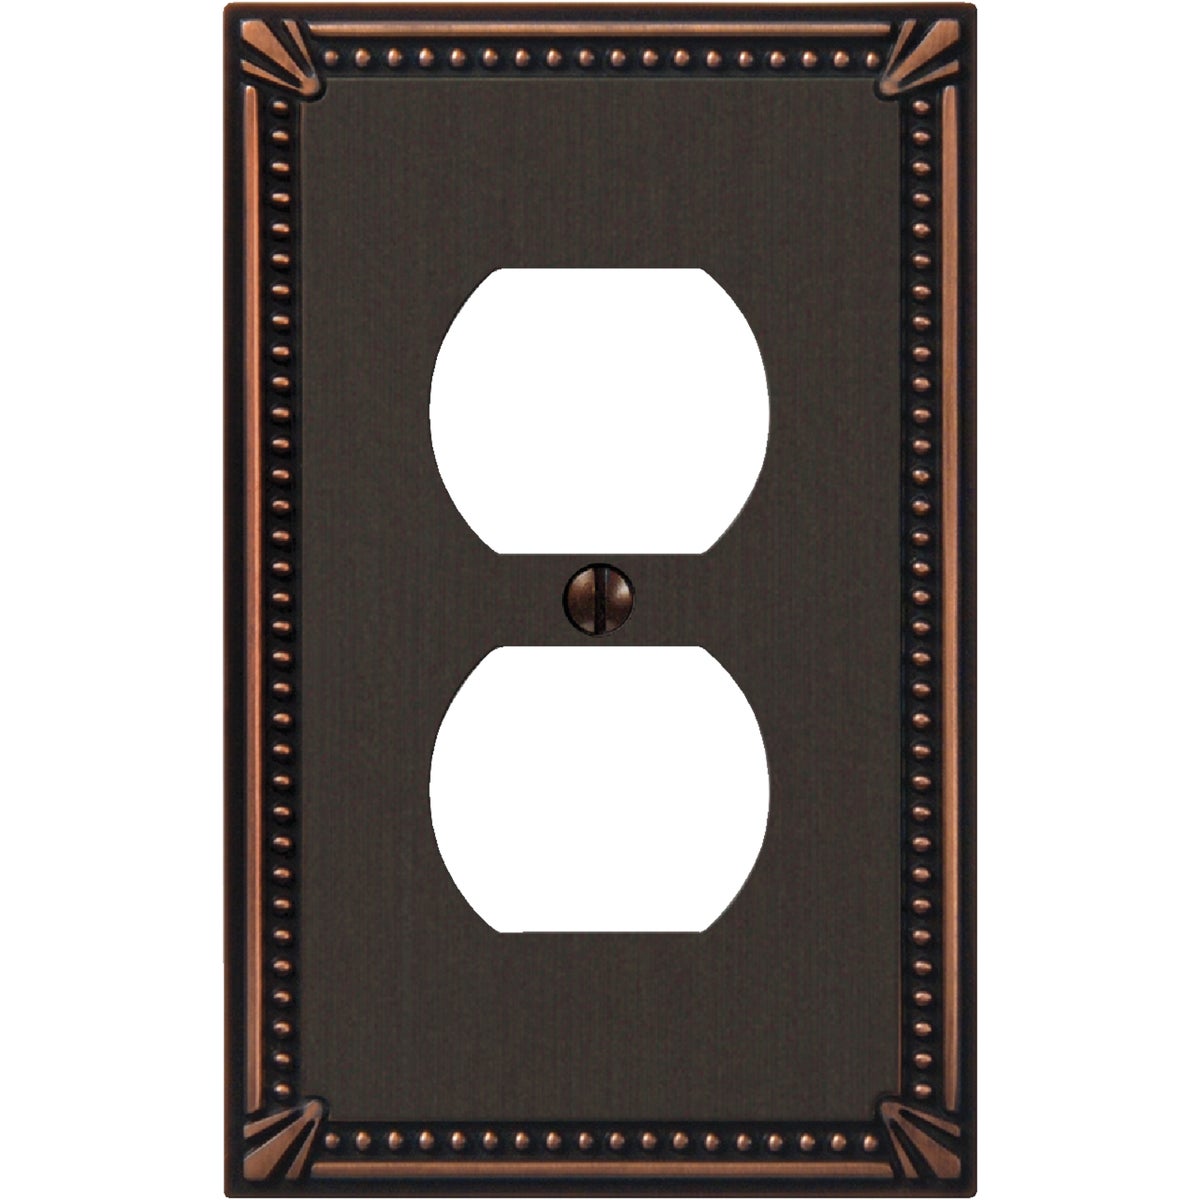 Item 511761, Imperial bead duplex outlet wall plate.